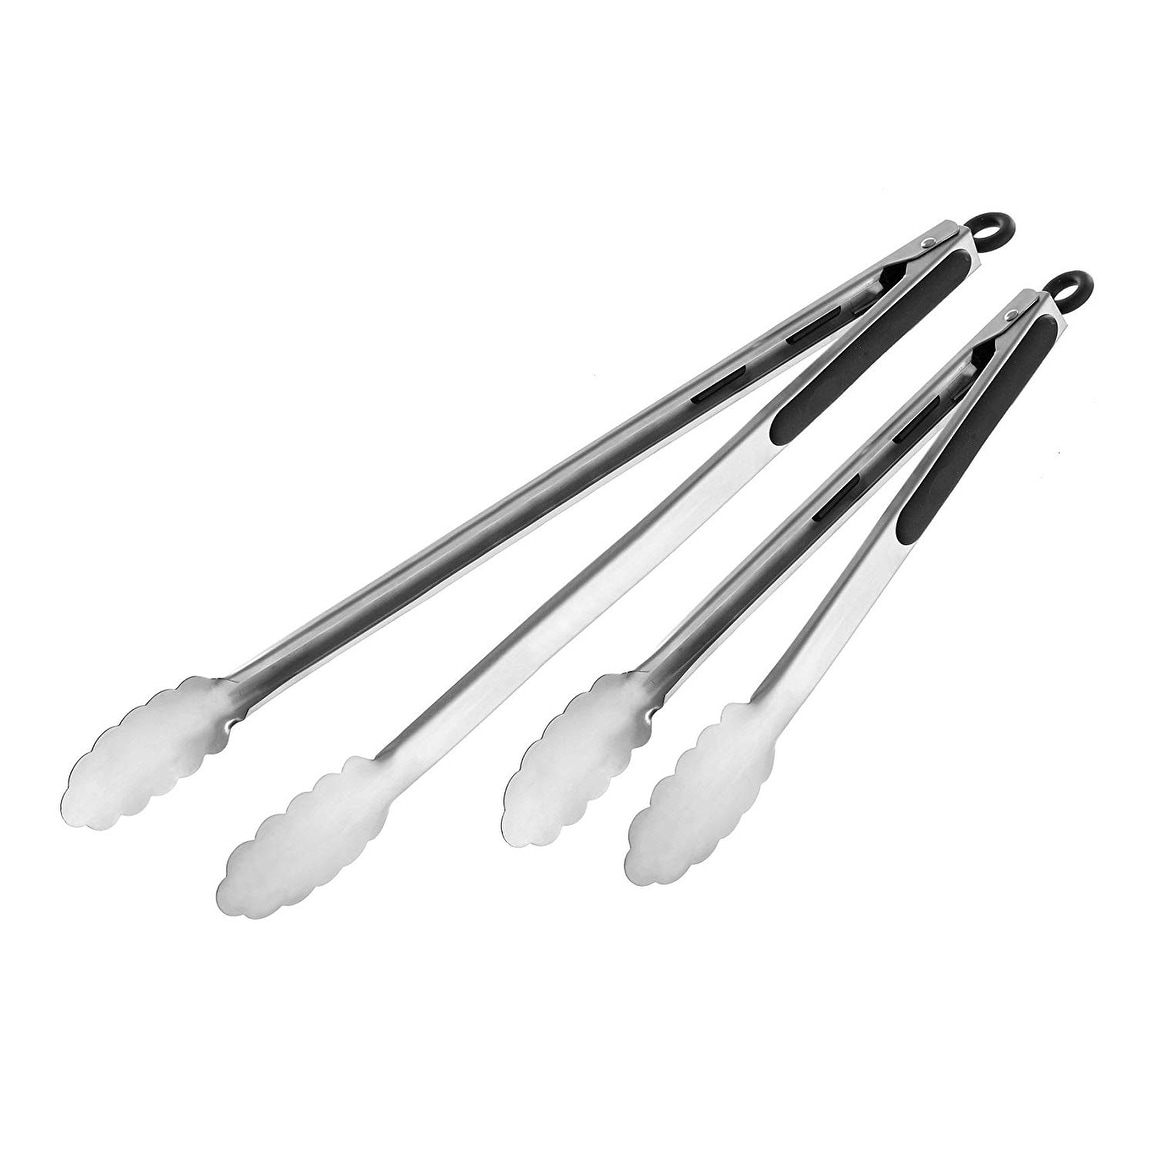 Tongs 16 Inches Stainless Steel long Grill Grilling Heavy BBQ